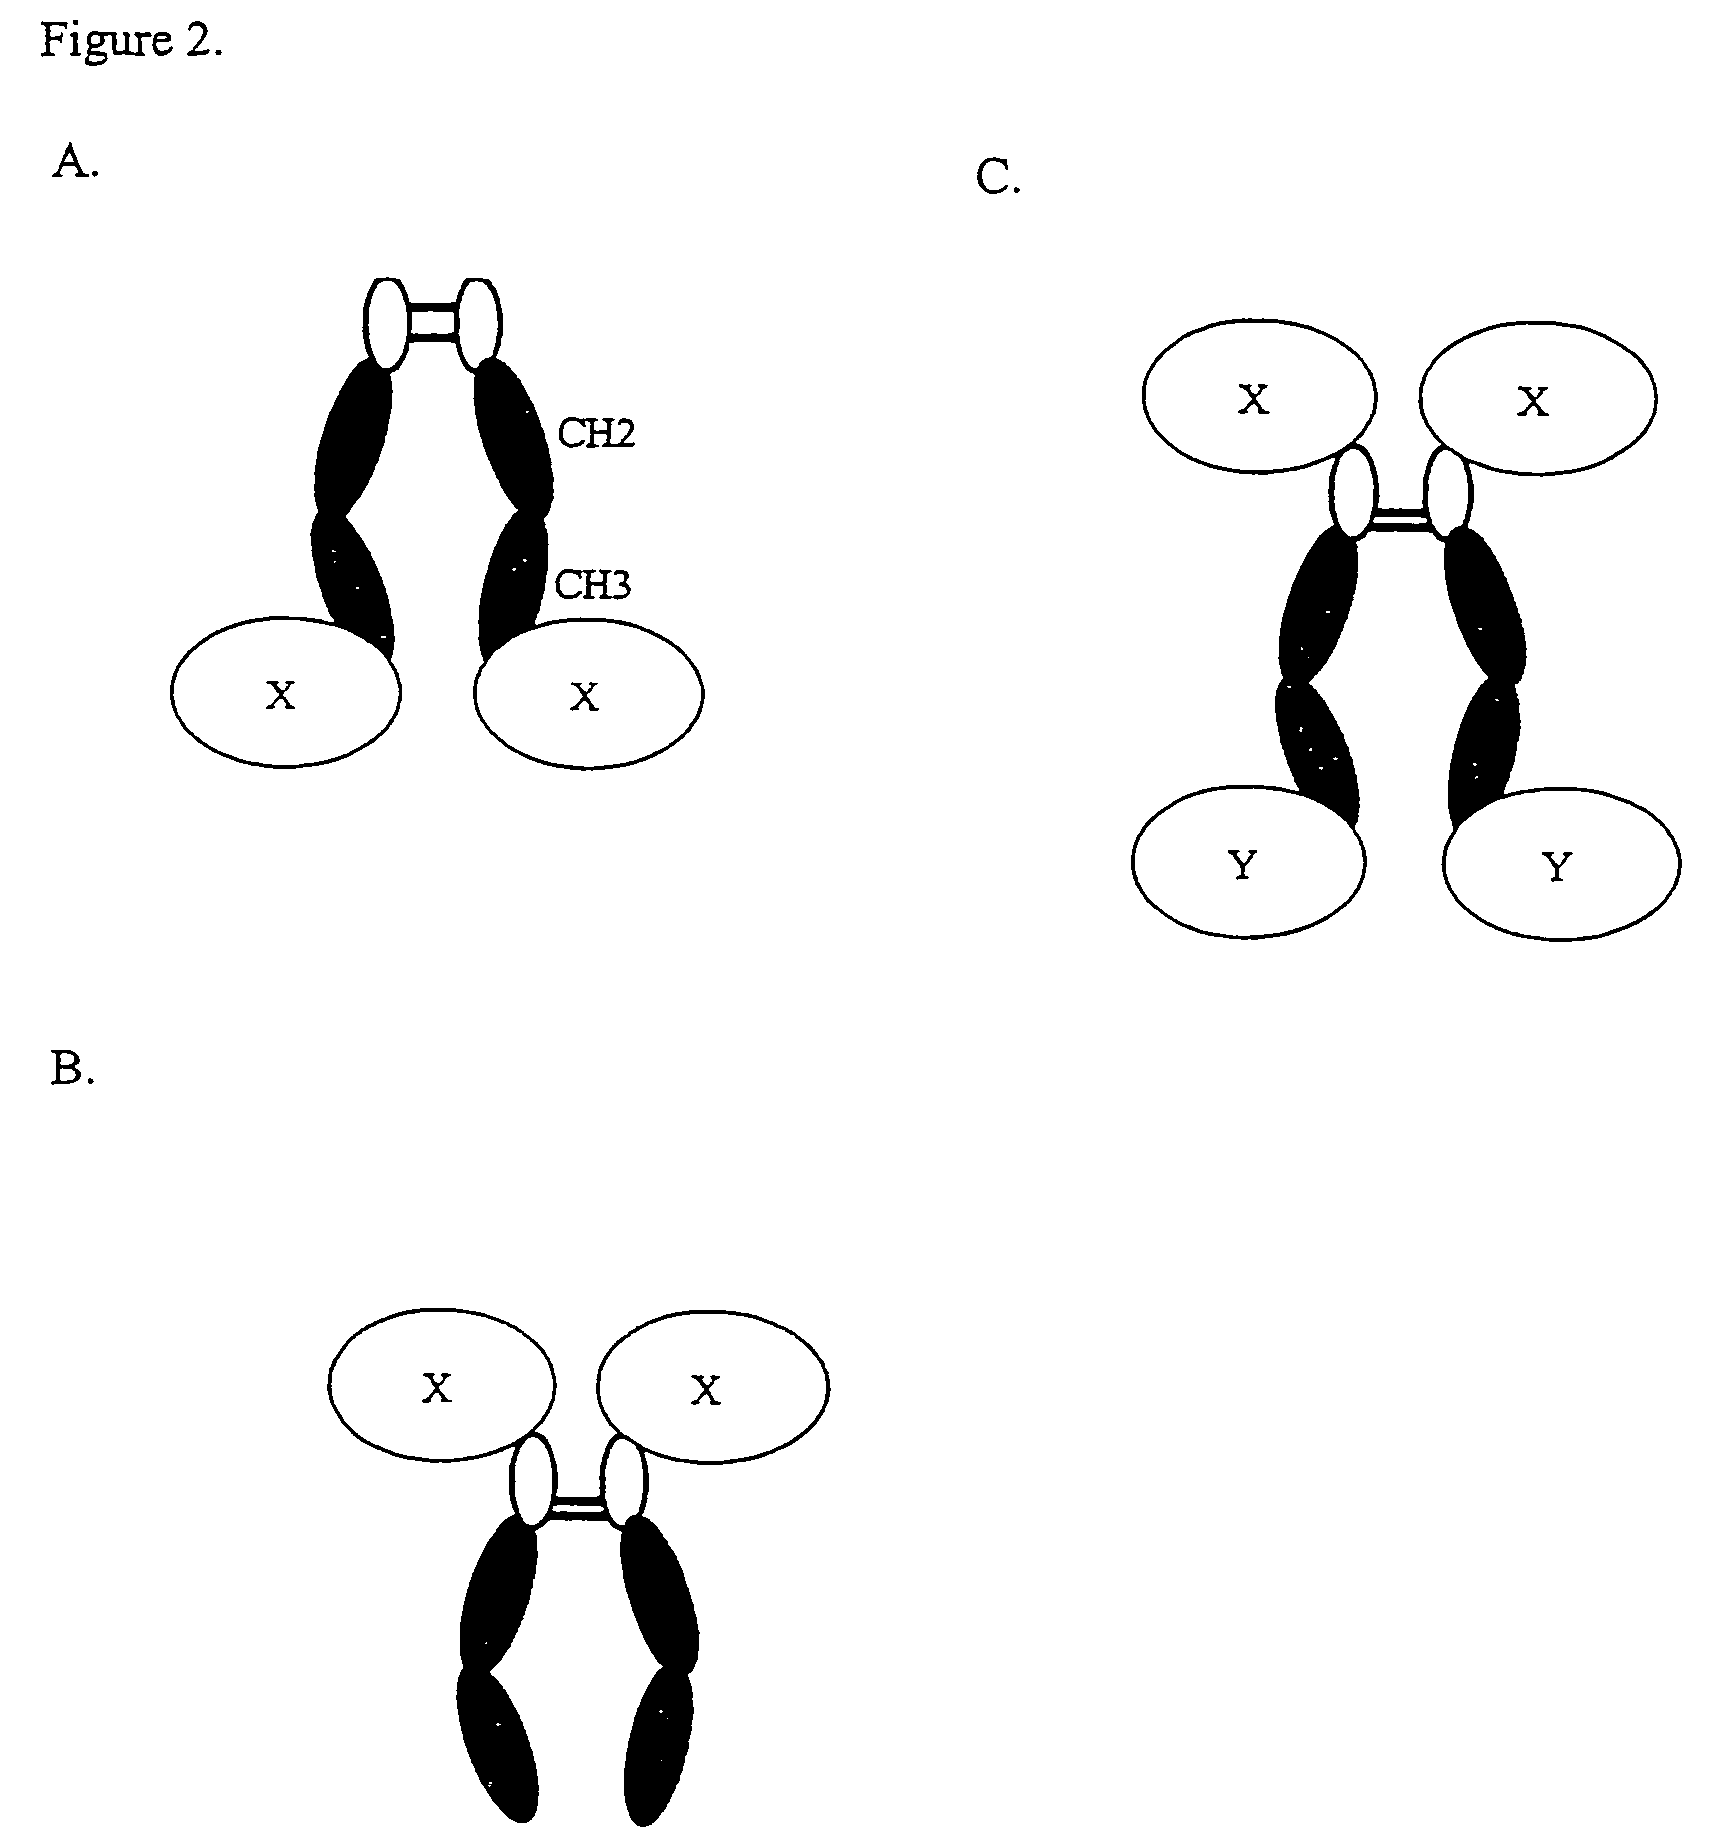 Proteins comprising an IgG2 domain